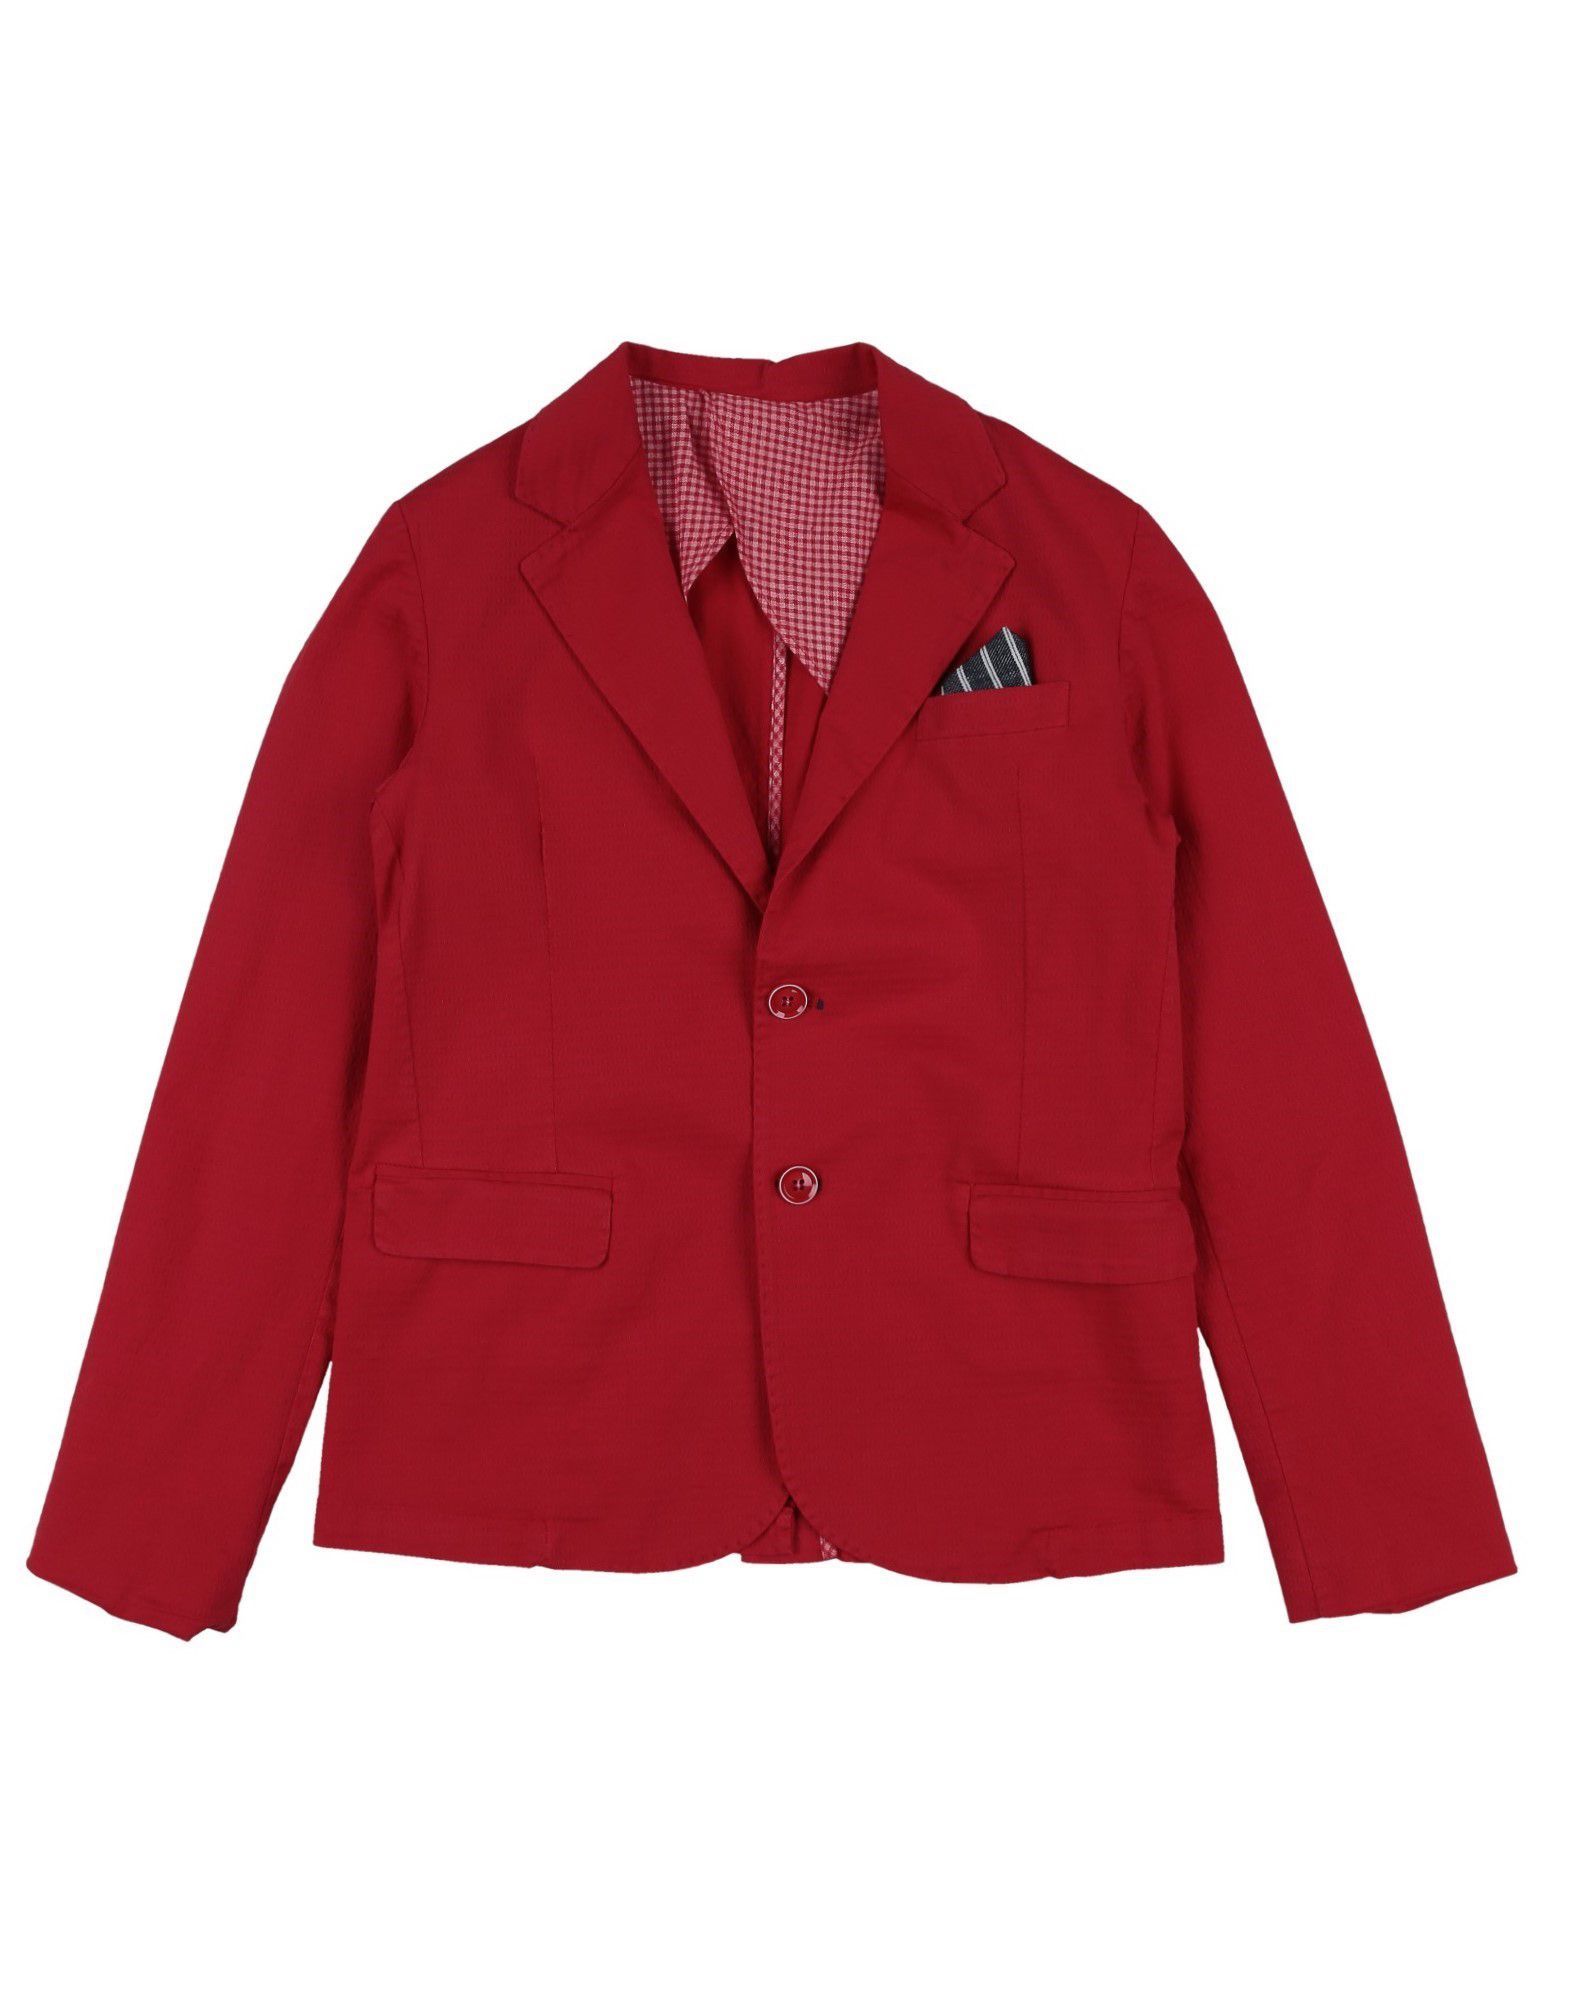 plain weave, no appliqu�s, basic solid colour, multipockets, single chest pocket, button closing, lapel collar, single-breasted , long sleeves, unlined, stretch, wash at 30� c, dry cleanable, iron at 110� c max, do not bleach, single-breasted jacket